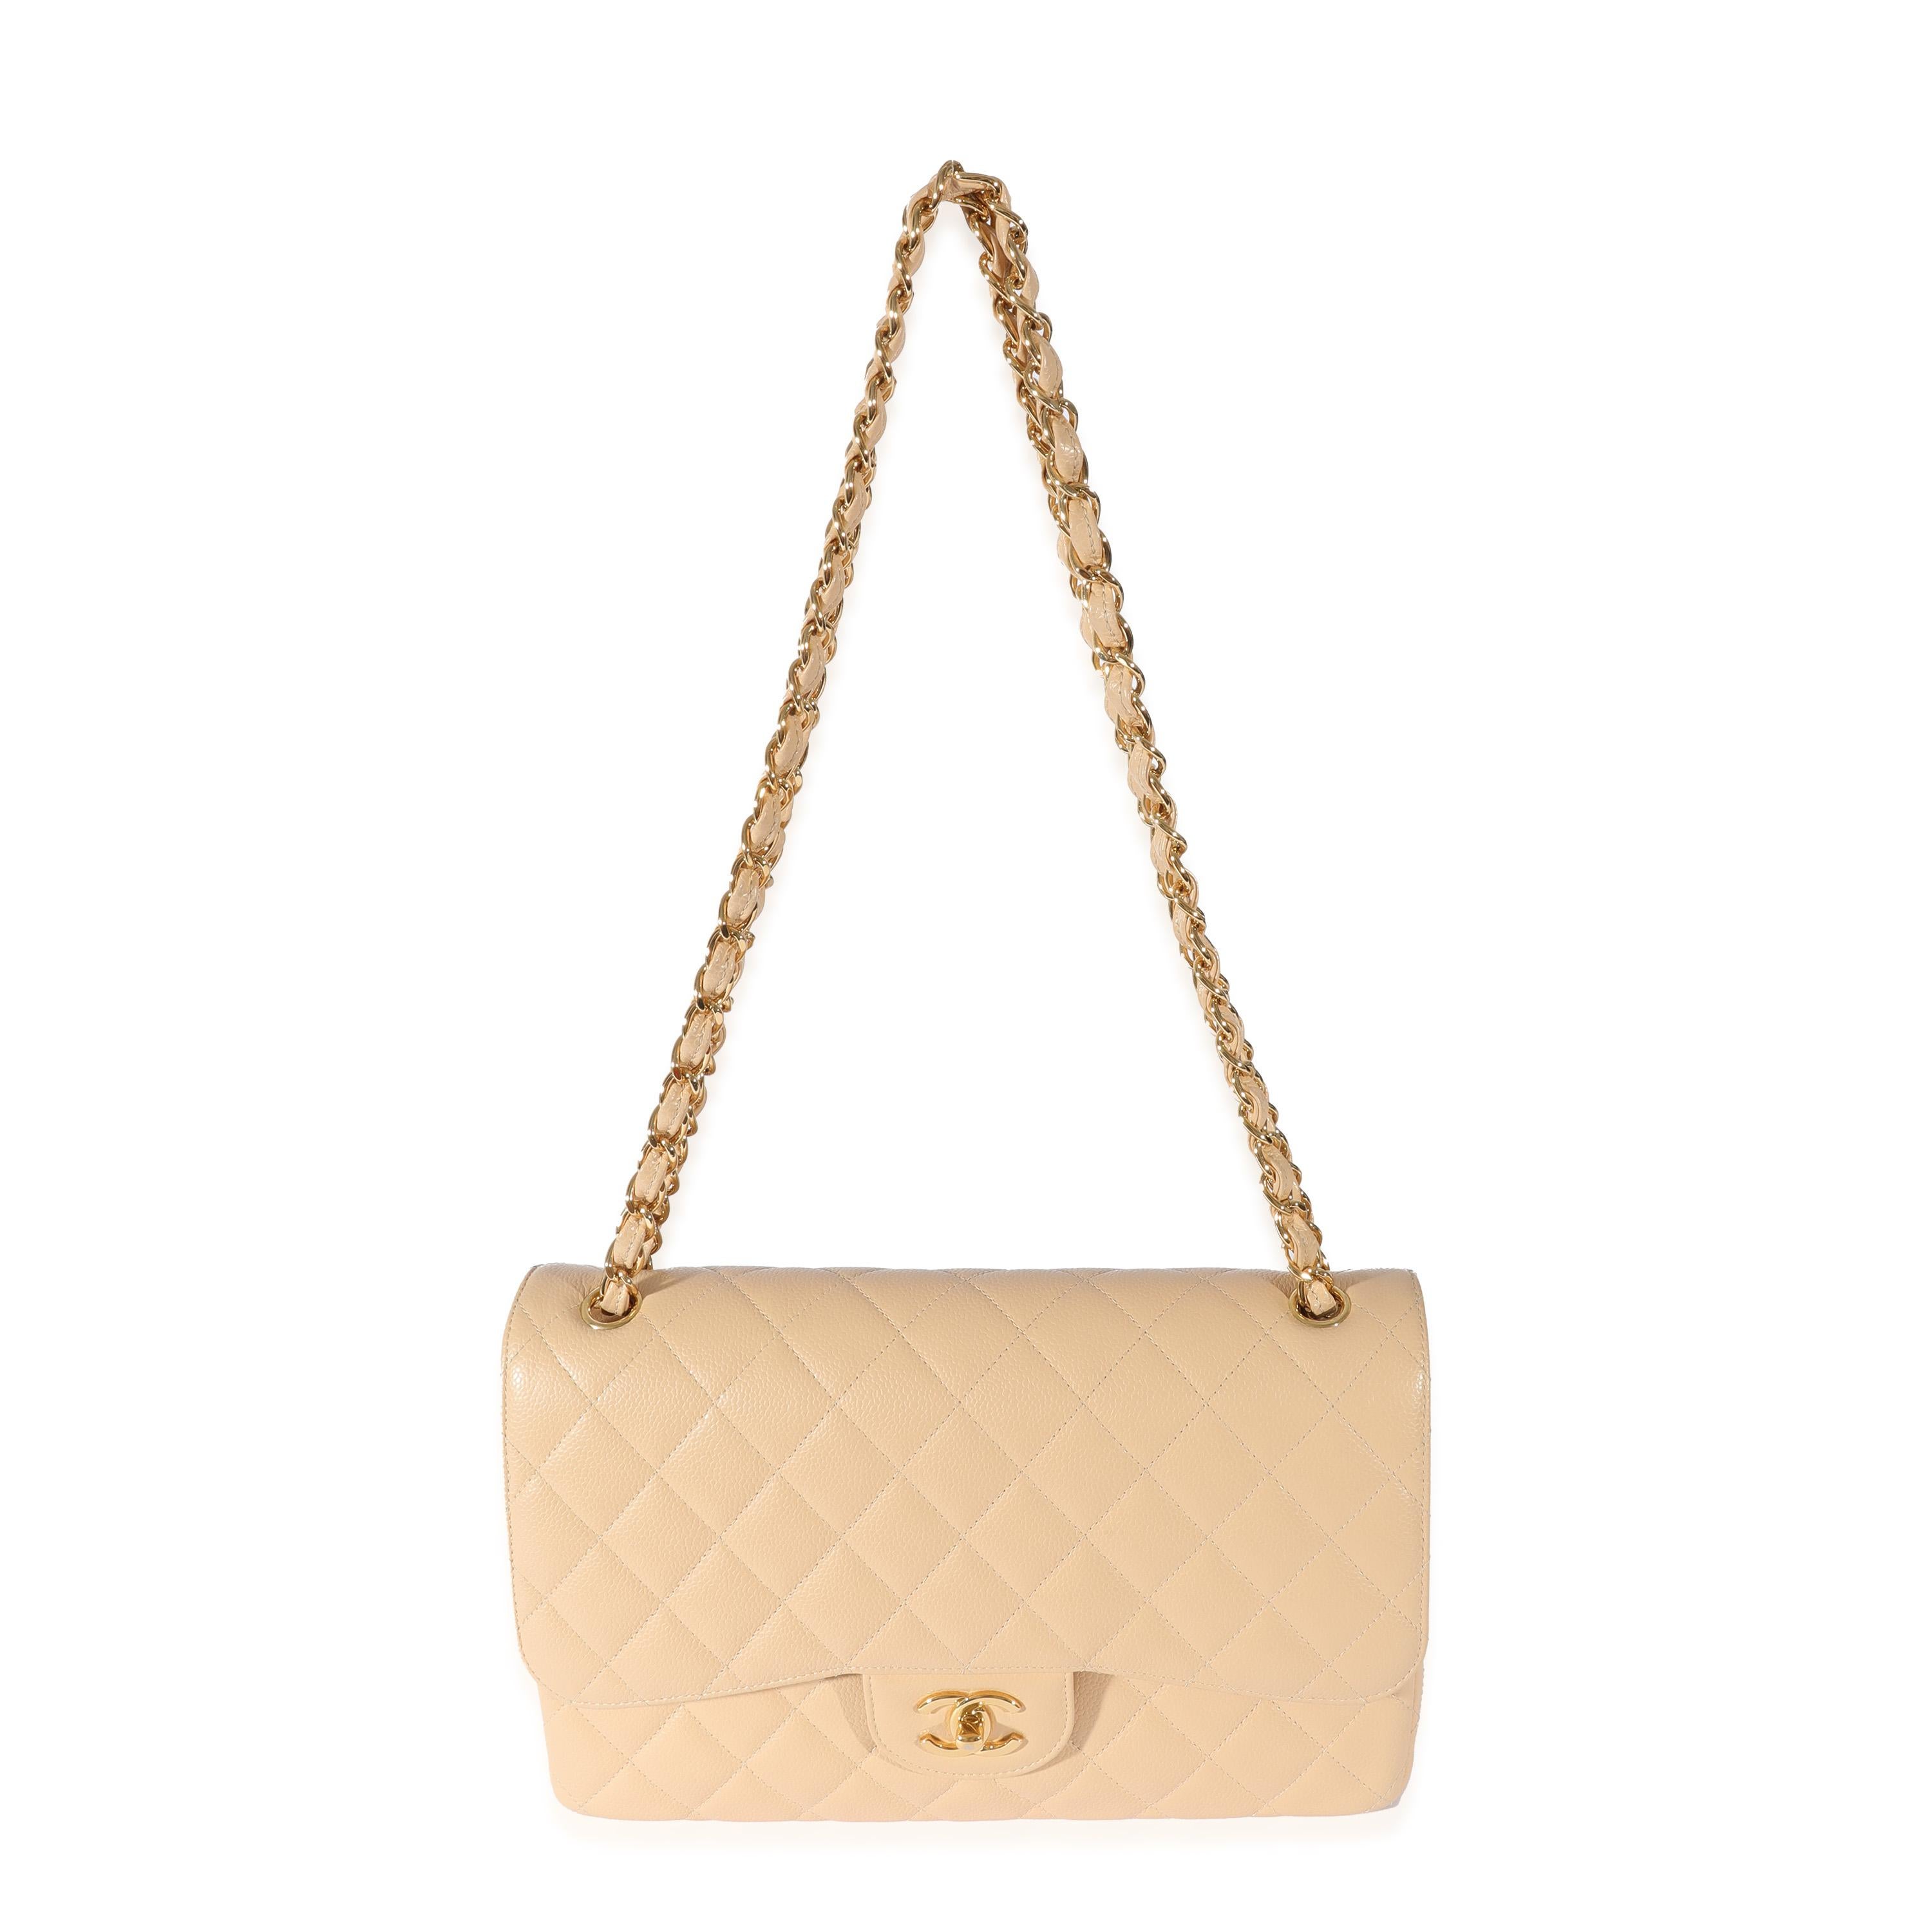 Listing Title: Chanel Beige Quilted Caviar Jumbo Classic Double Flap Bag
 SKU: 128483
 MSRP: 9500.00
 Condition: Pre-owned 
 Condition Description: A timeless classic that never goes out of style, the flap bag from Chanel dates back to 1955 and has